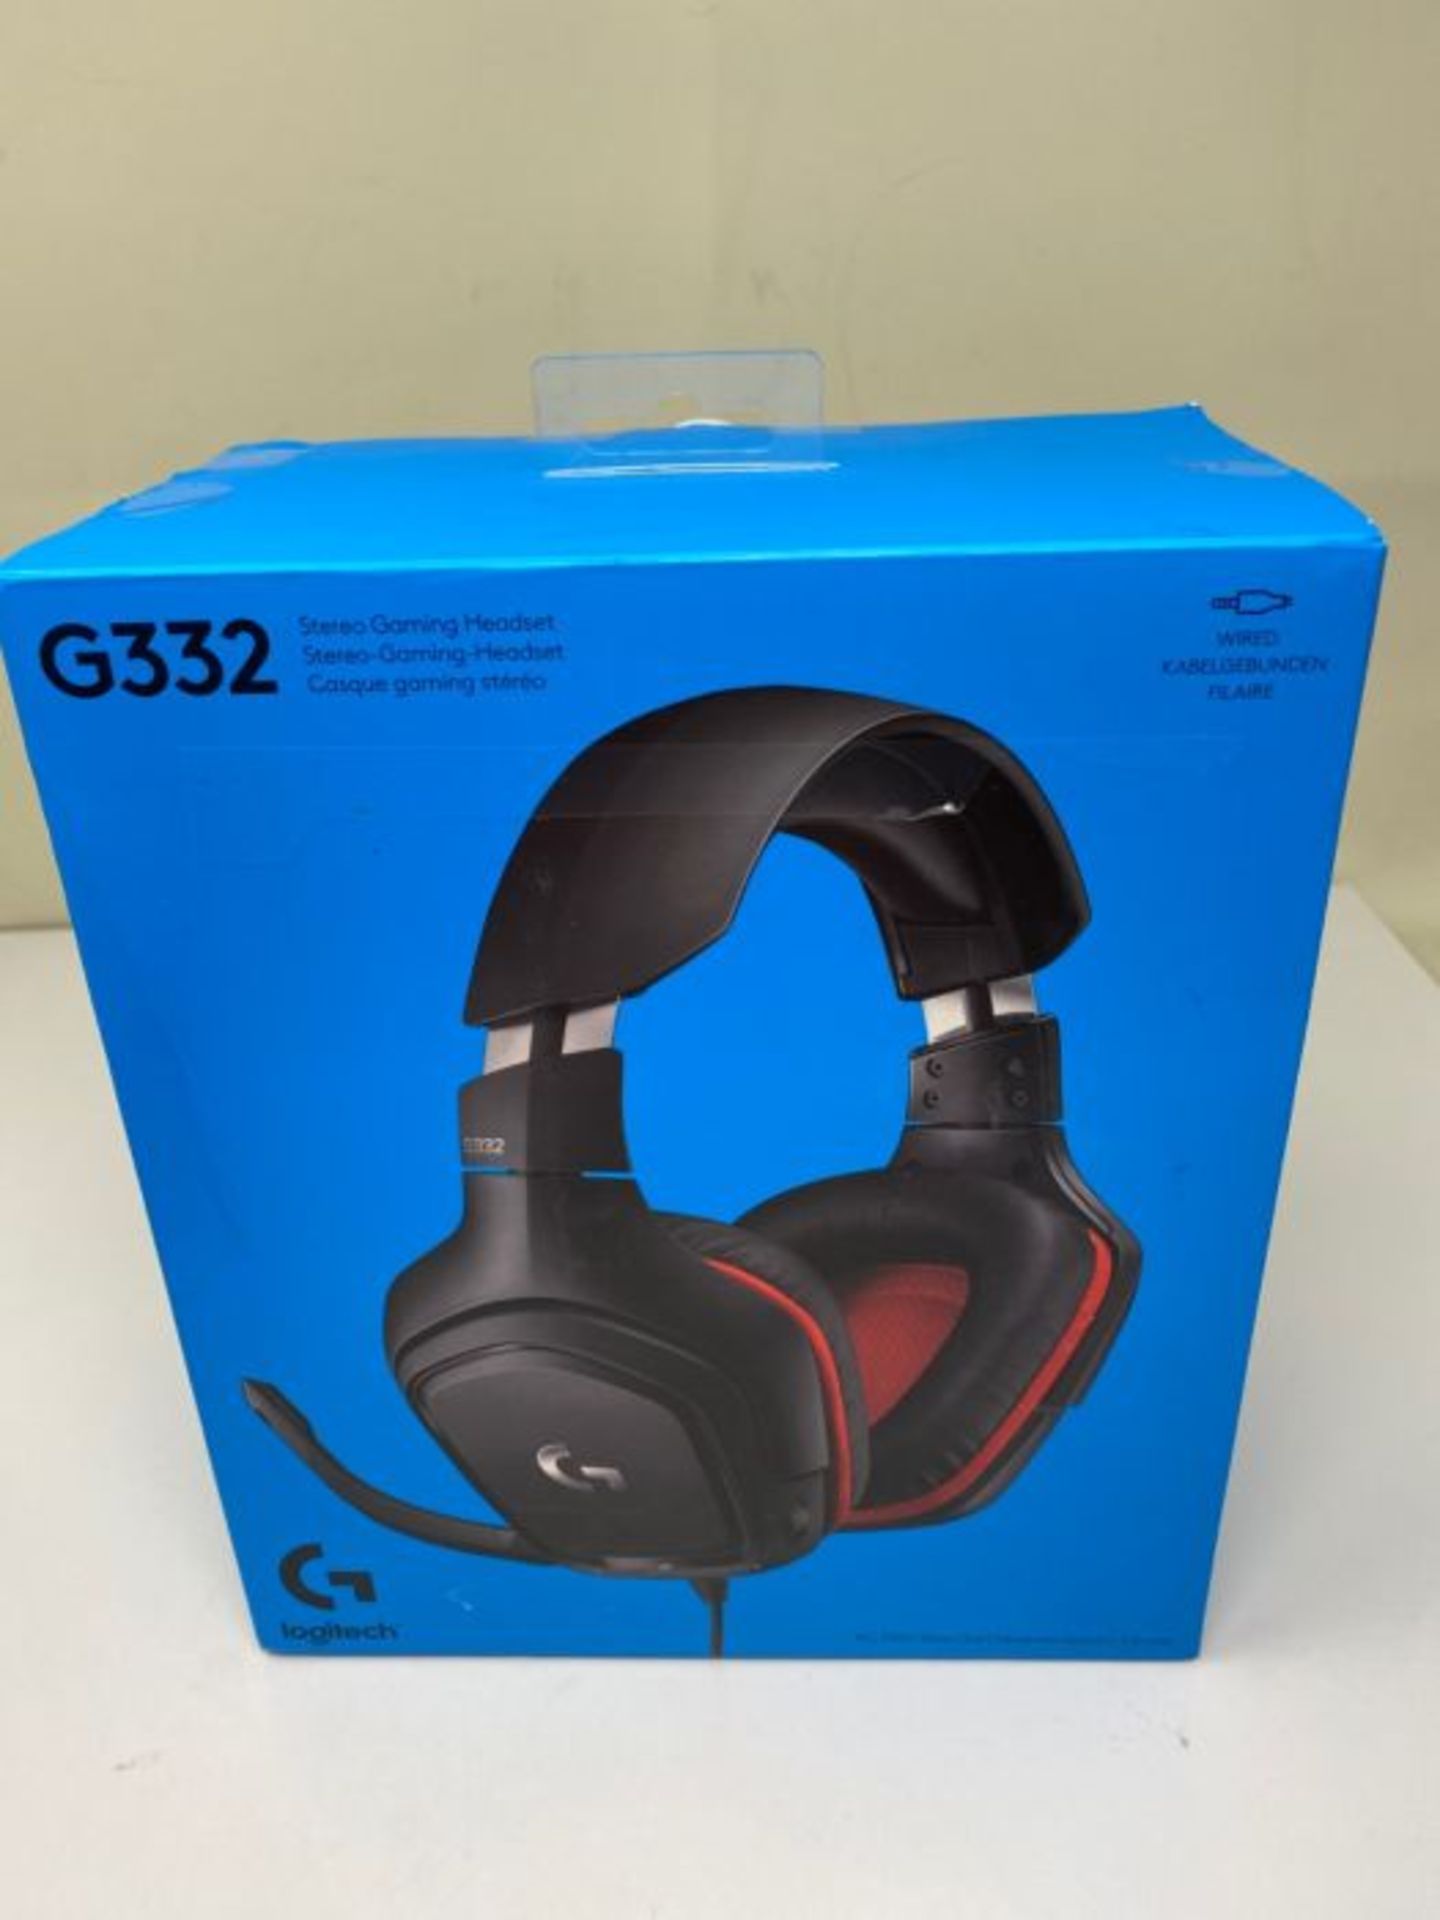 Logitech G332 Wired Gaming Headset, 50 mm Audio Drivers, Rotating Leatherette Ear Cups - Image 2 of 3